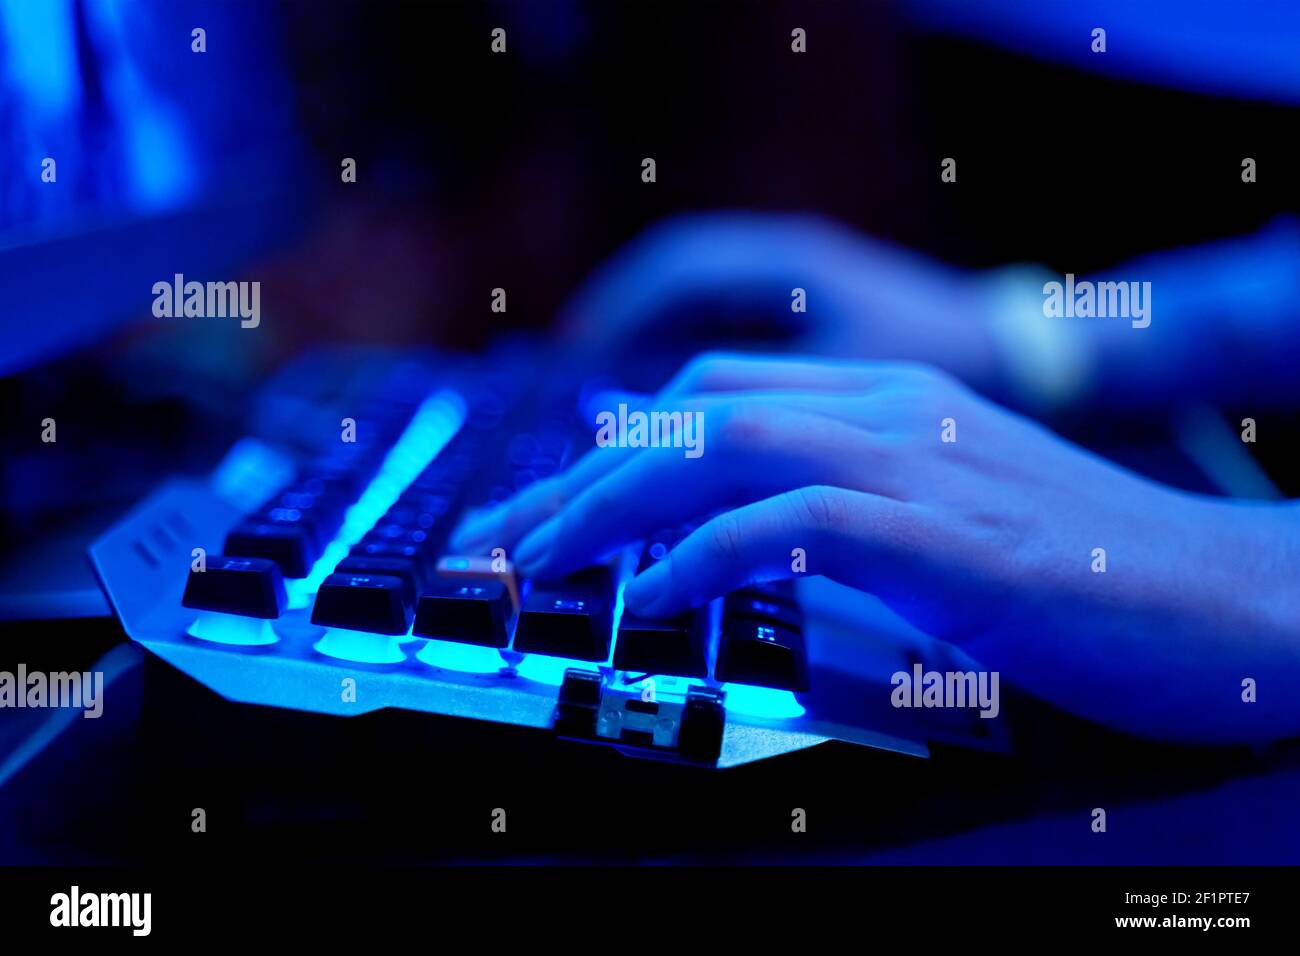 Gaming Keyboard. Closeup of hands on neon lit keyboard. Streaming online games on internet. Stock Photo